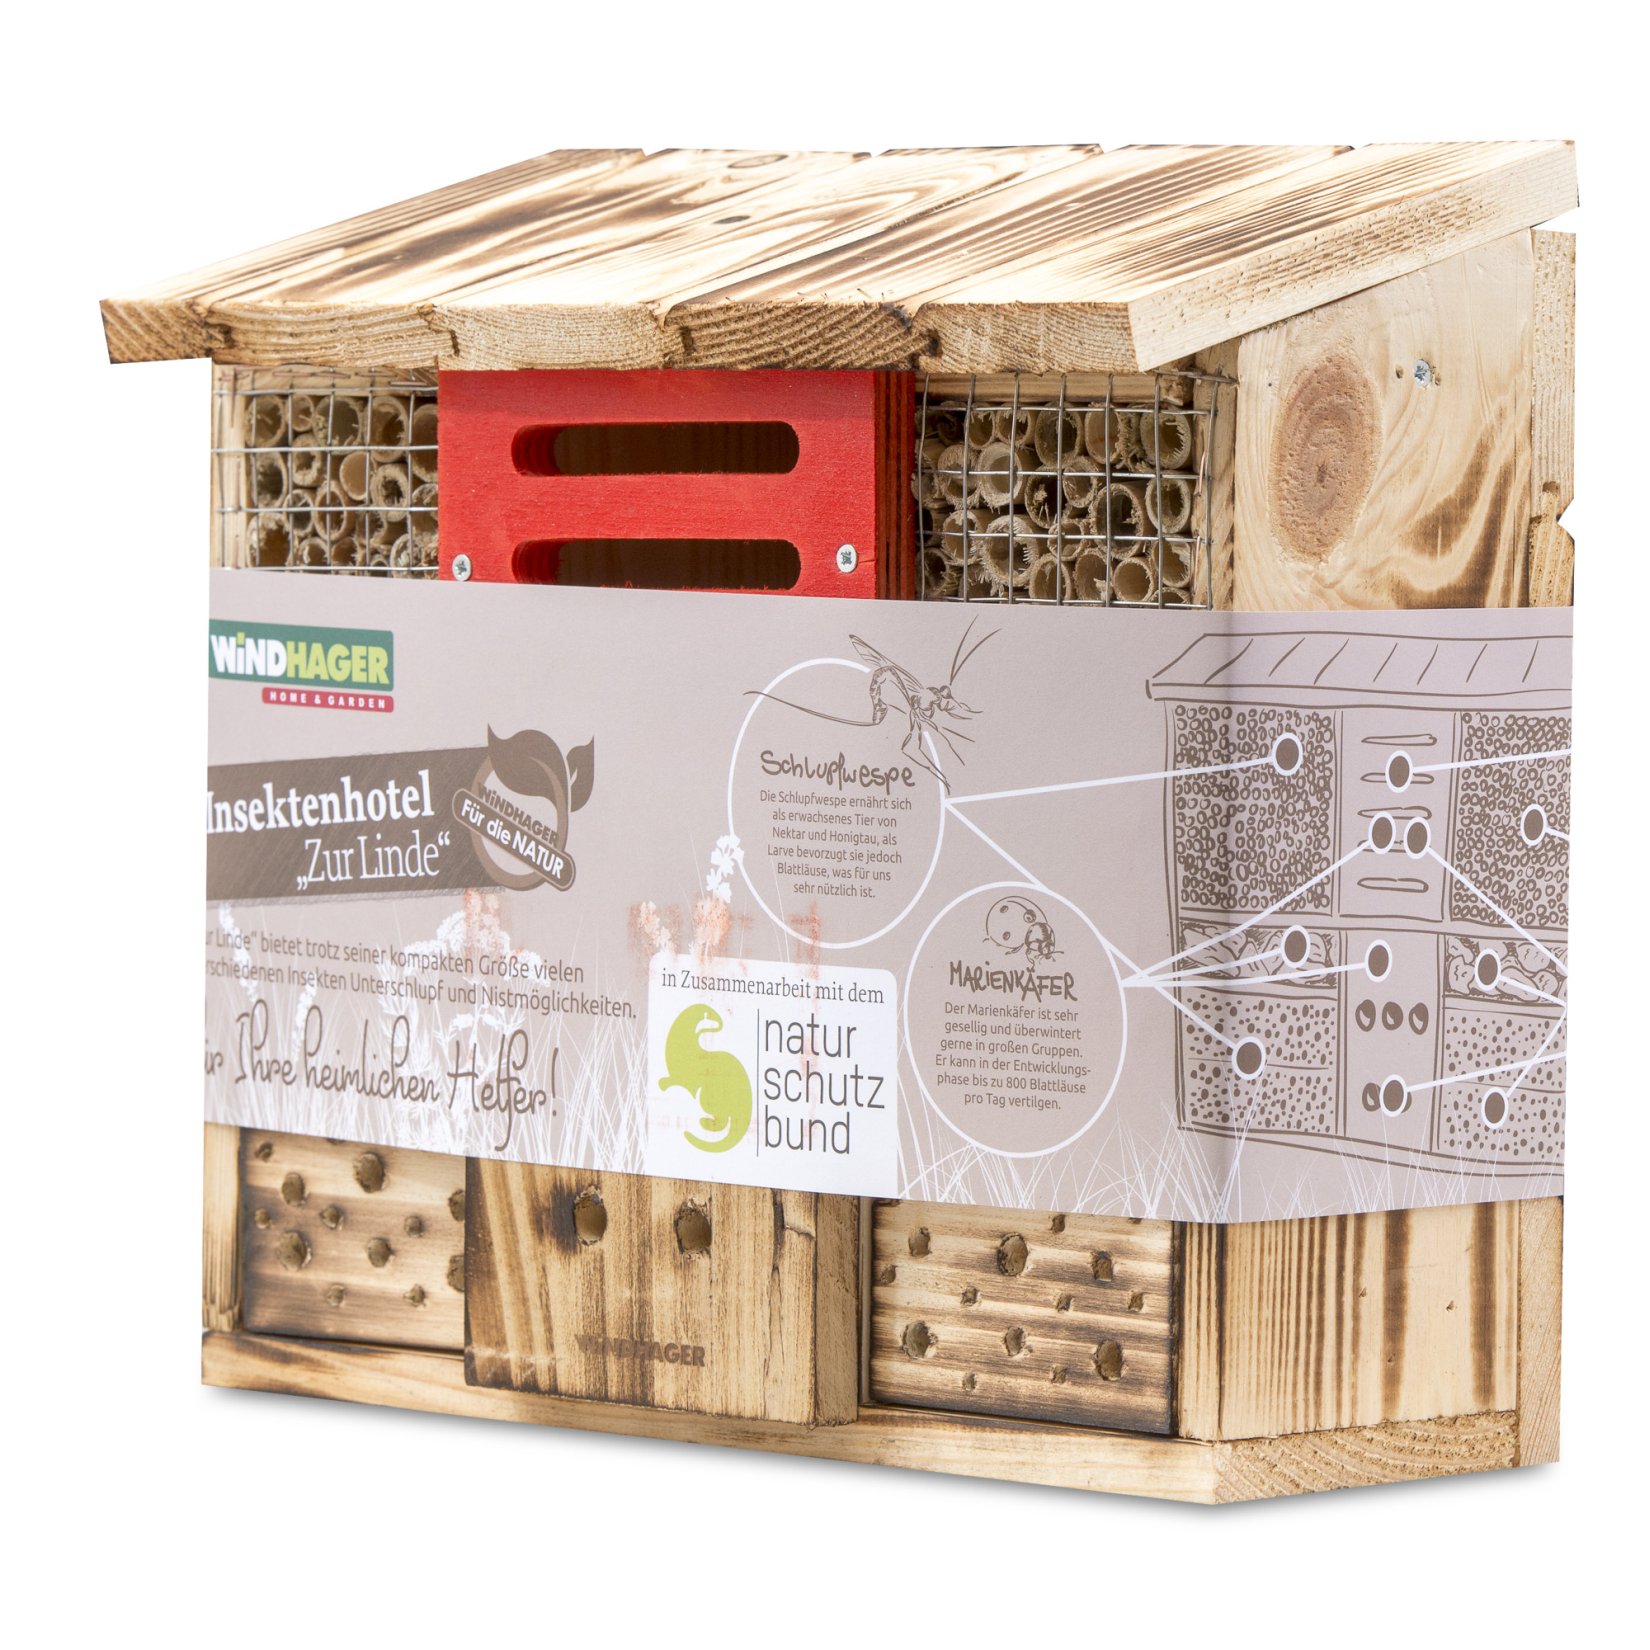 Insect hotel - bee hotel - nesting aid for useful insects